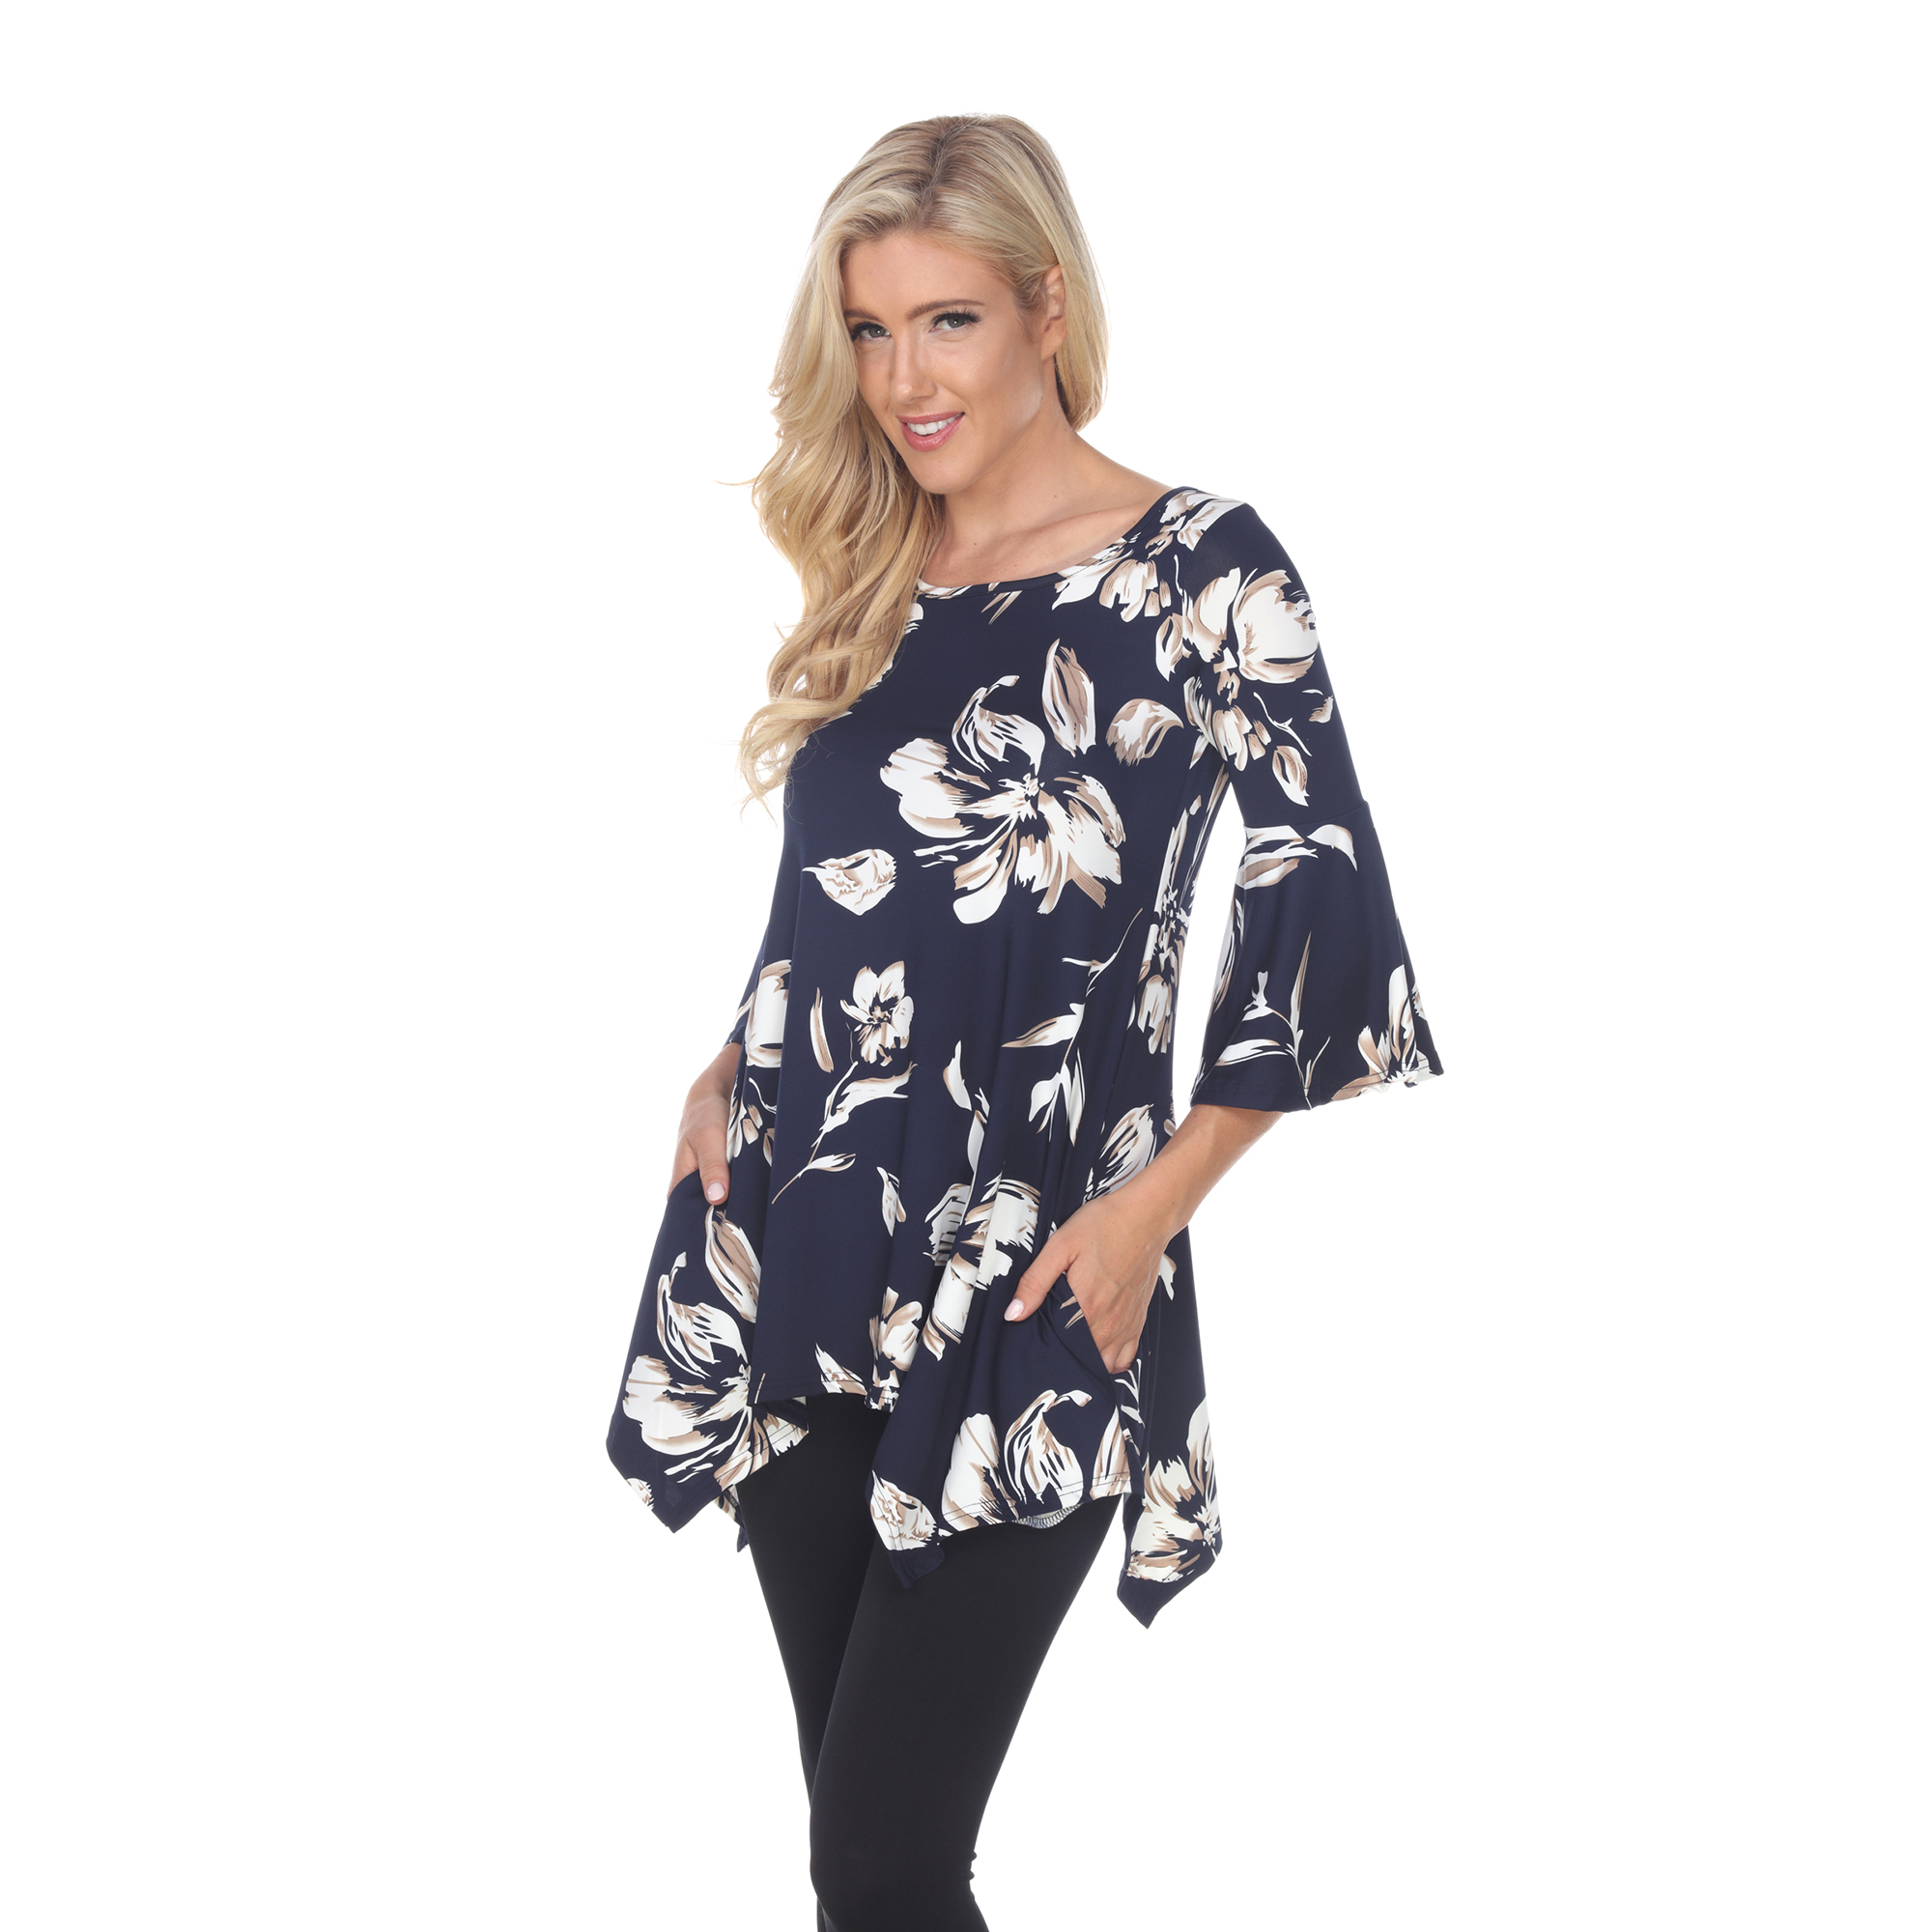 White Mark Women's Floral Print Quarter Sleeve Tunic Top With Pockets - Navy, 3X